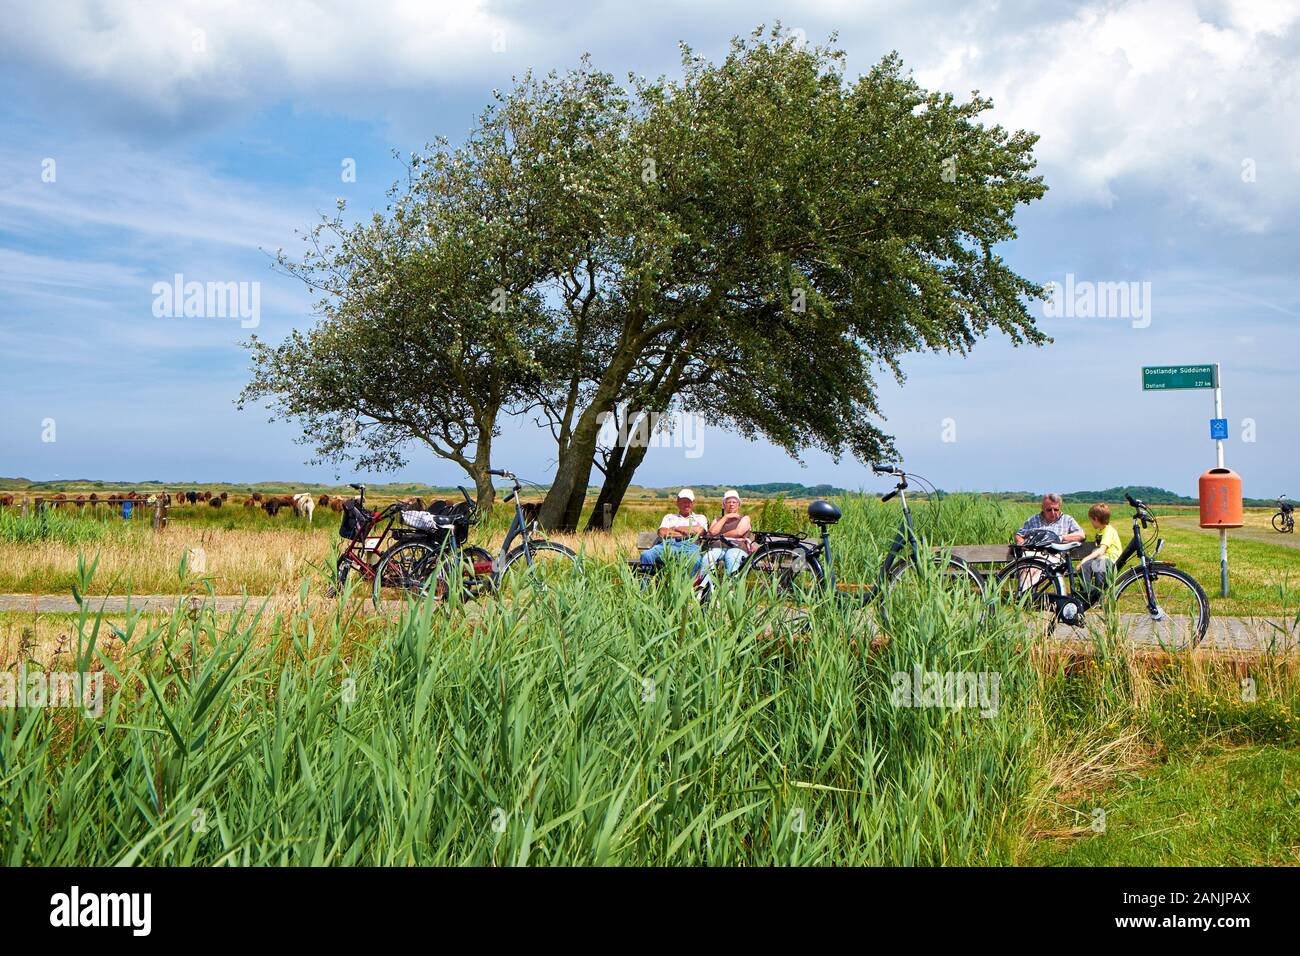 Cyclists relaxing on wooden benches in a landscape with windswept trees  grazing cows and an orange coloured litter bin Stock Photo